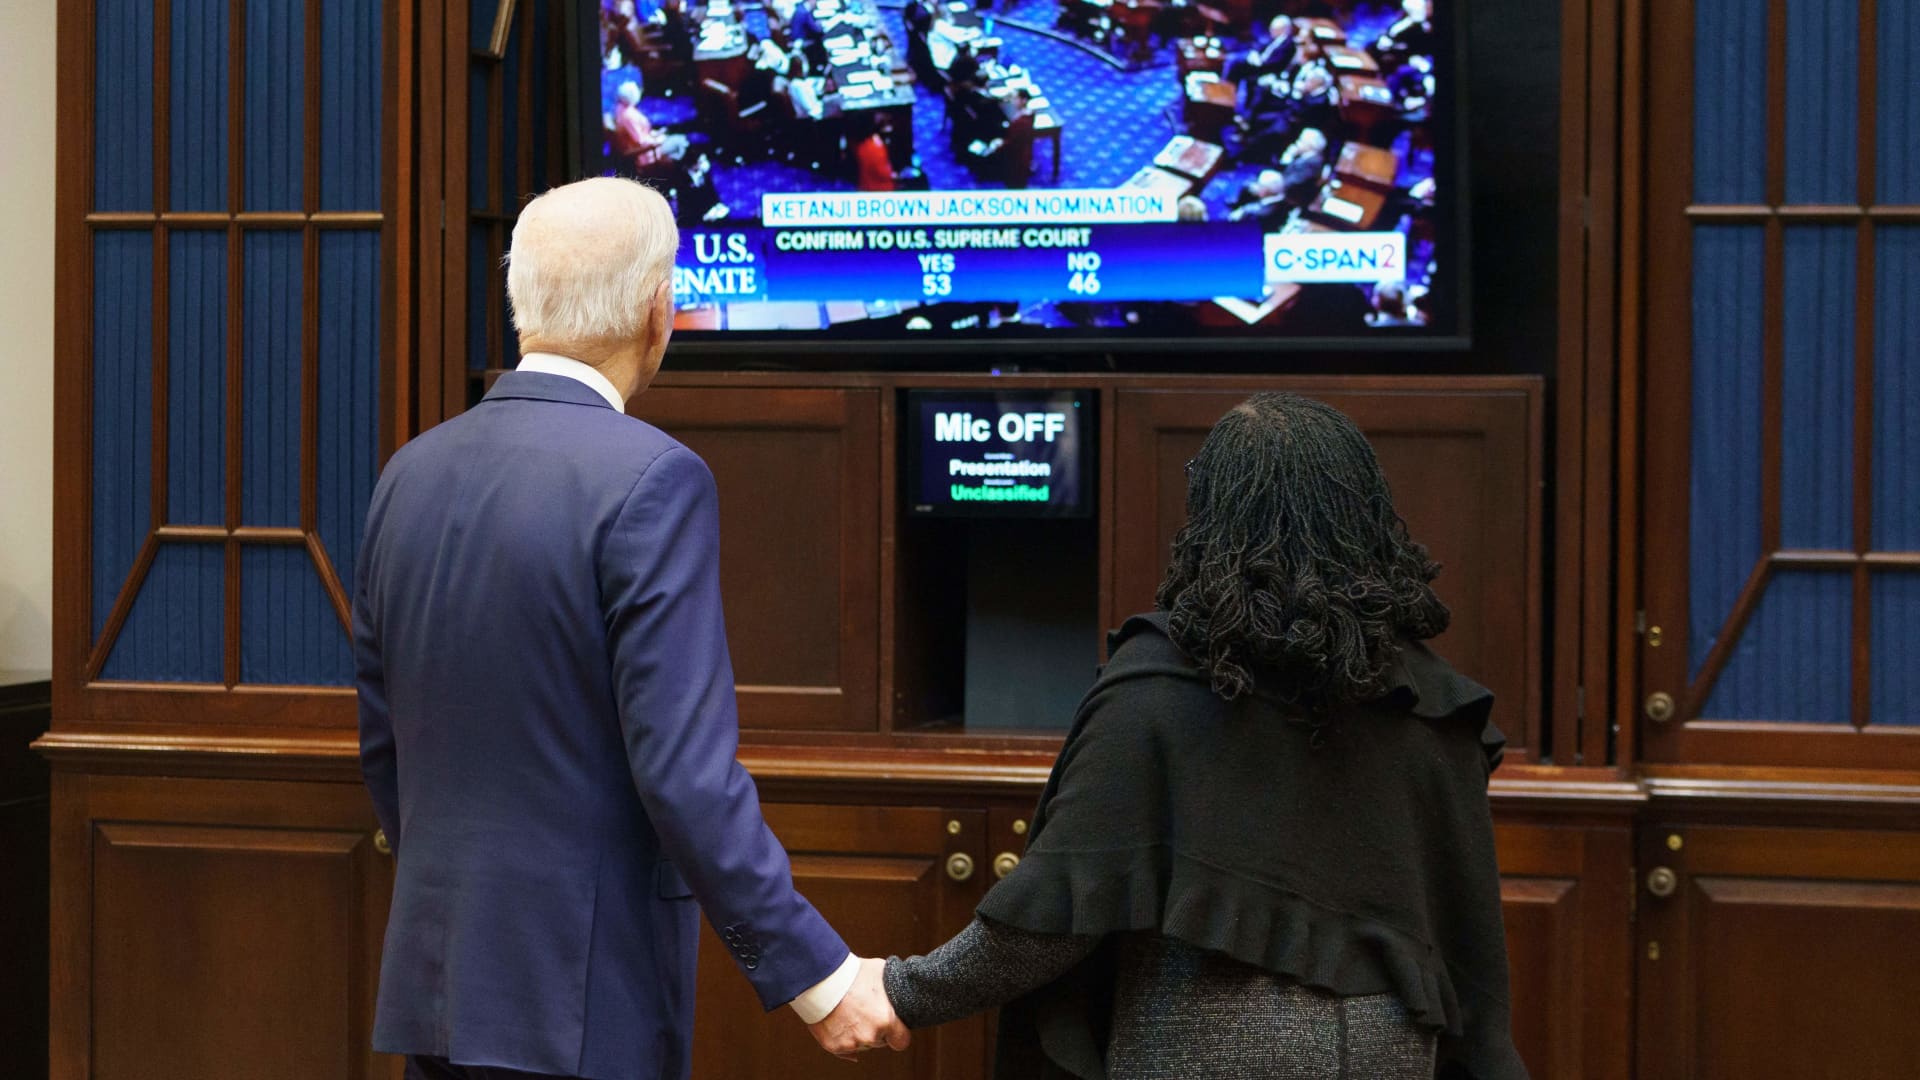 US President Joe Biden and judge Ketanji Brown Jackson watch the Senate vote on her nomination to an an associate justice on the US Supreme Court, from the Roosevelt Room of the White House in Washington, DC on April 7, 2022.